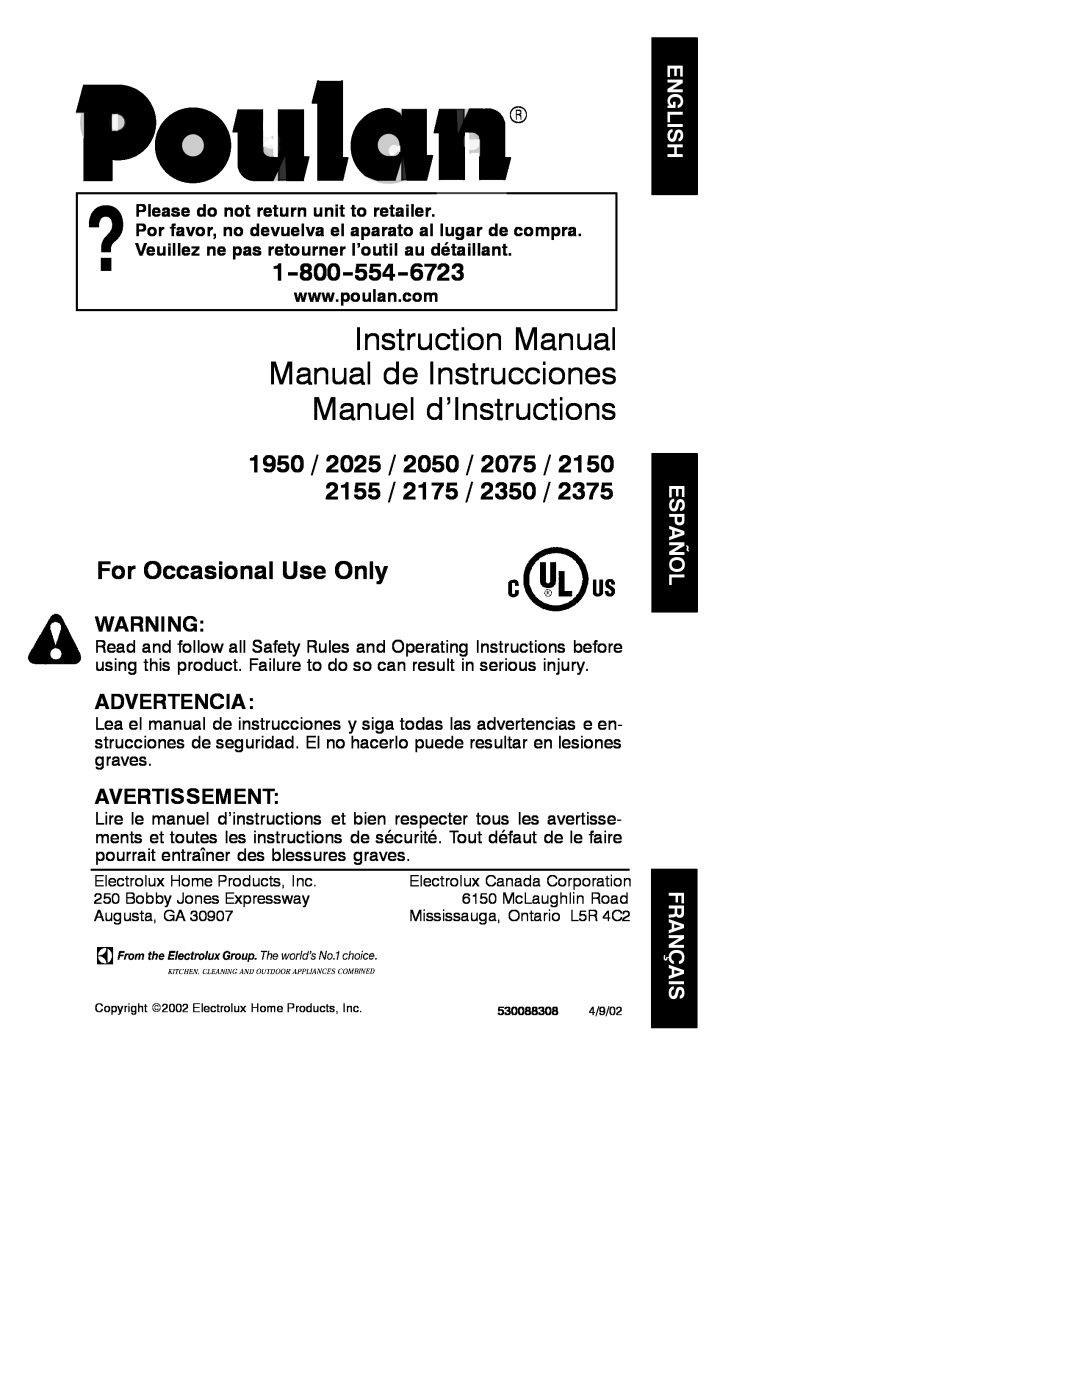 Poulan 530088308 instruction manual 1950 / 2025 / 2050 / 2075 2155 / 2175 / 2350 For Occasional Use Only, Advertencia 